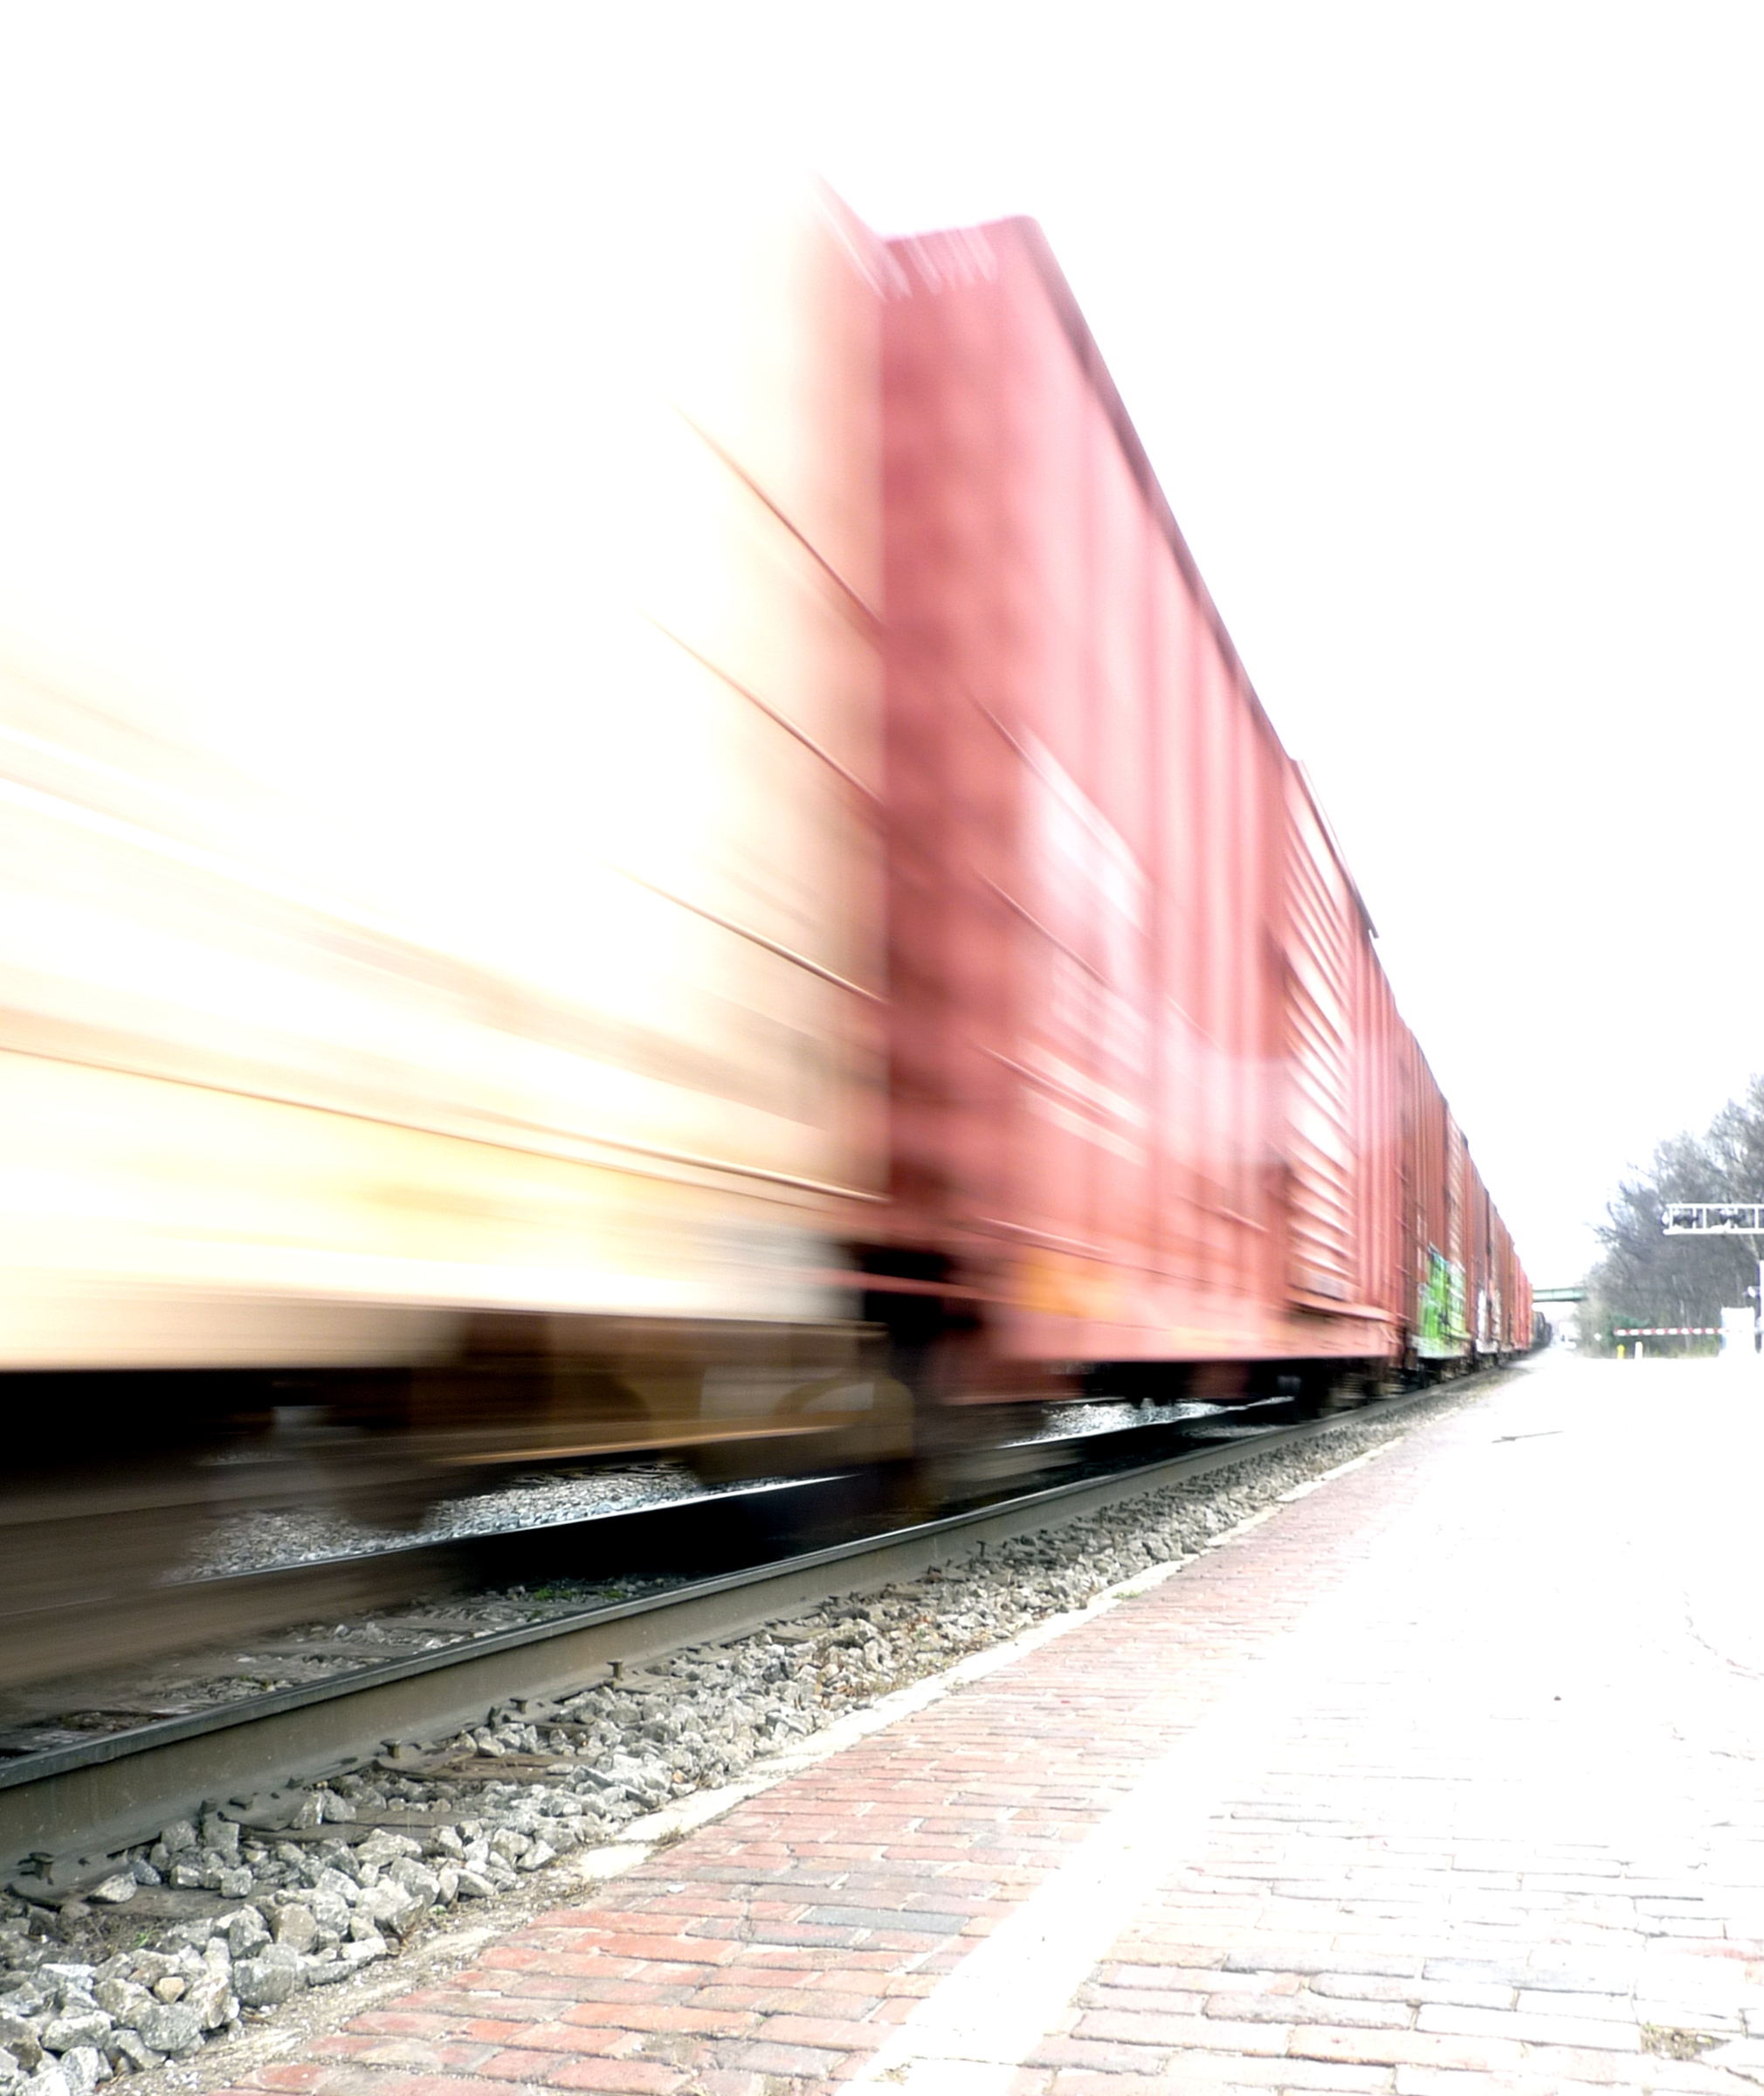 Motion-blurred freight cars rushing past to the left side of a brick train platform